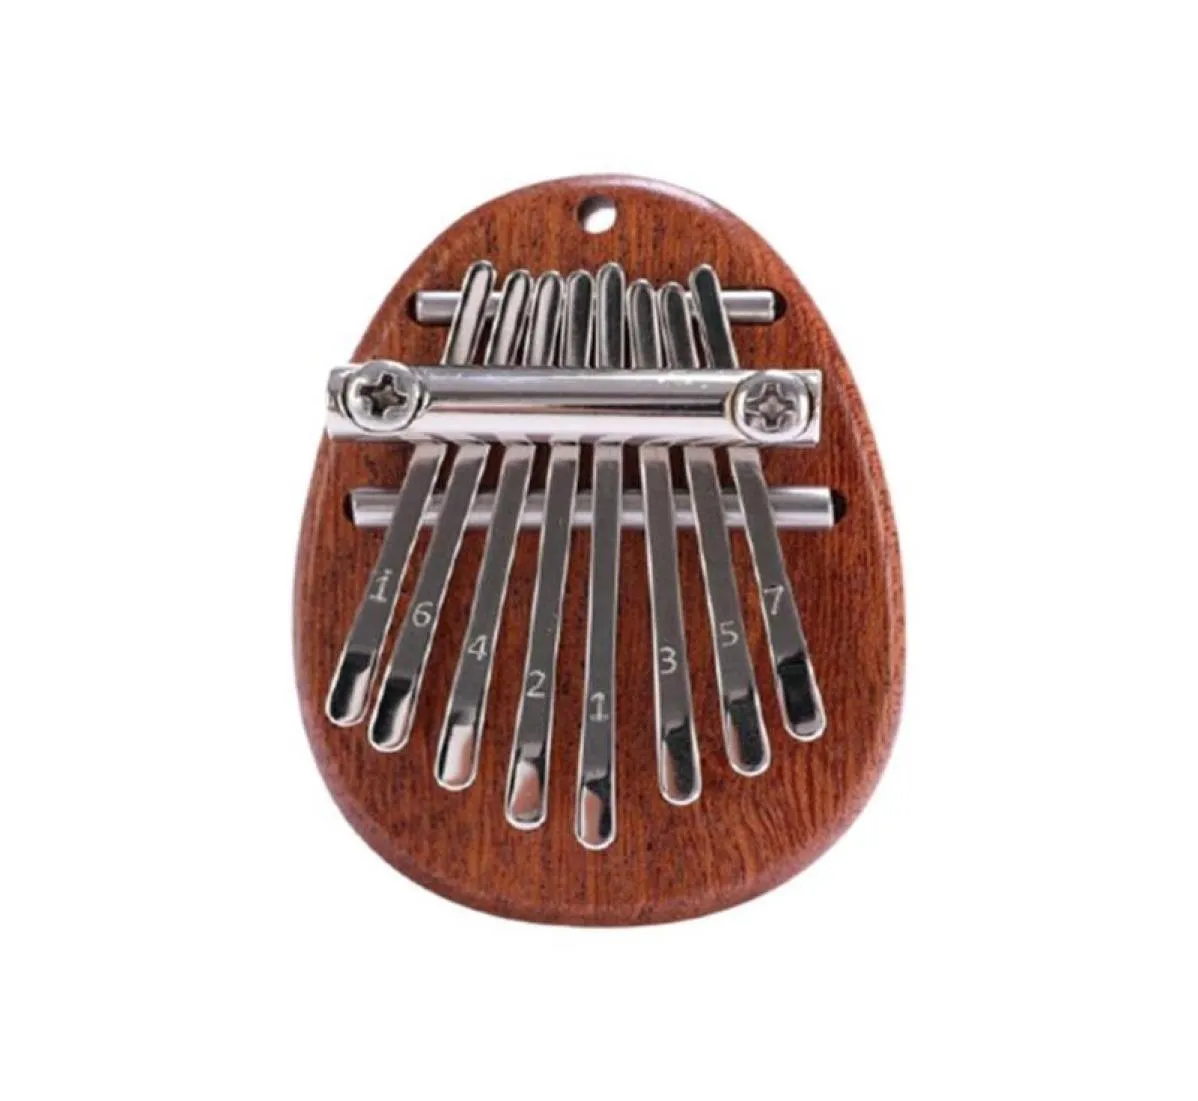 Party Favor 8 Key Mini Wood Crystal Thumb Piano Finger Percussion Instrument Pocket Keyboard Portable Children039s Holiday Gift5605349